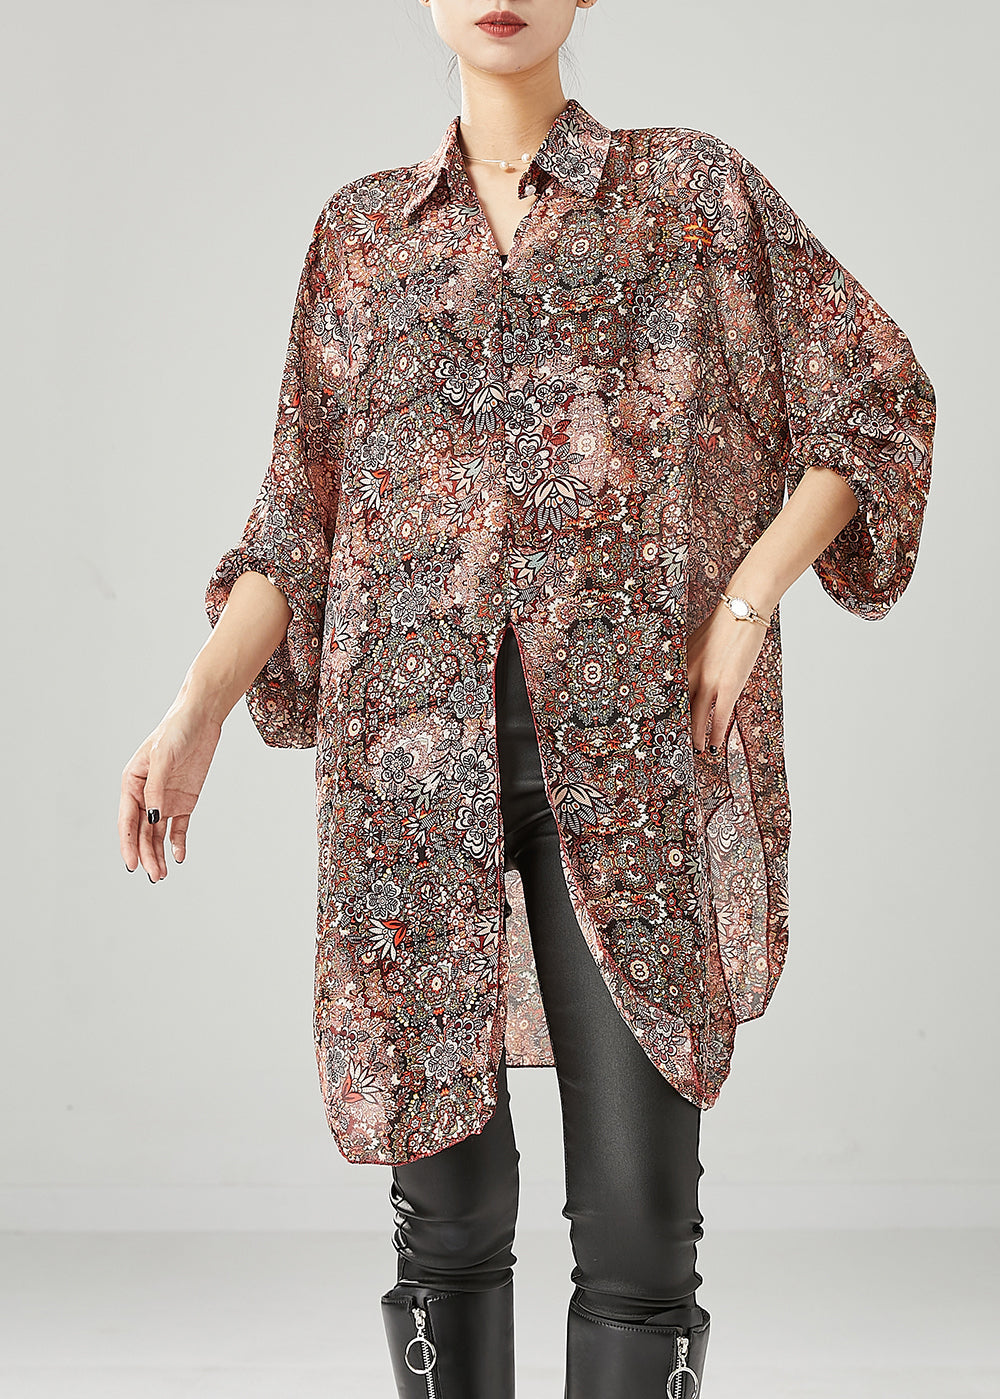 Fitted Brick Red Oversized Print Chiffon Tops Fall